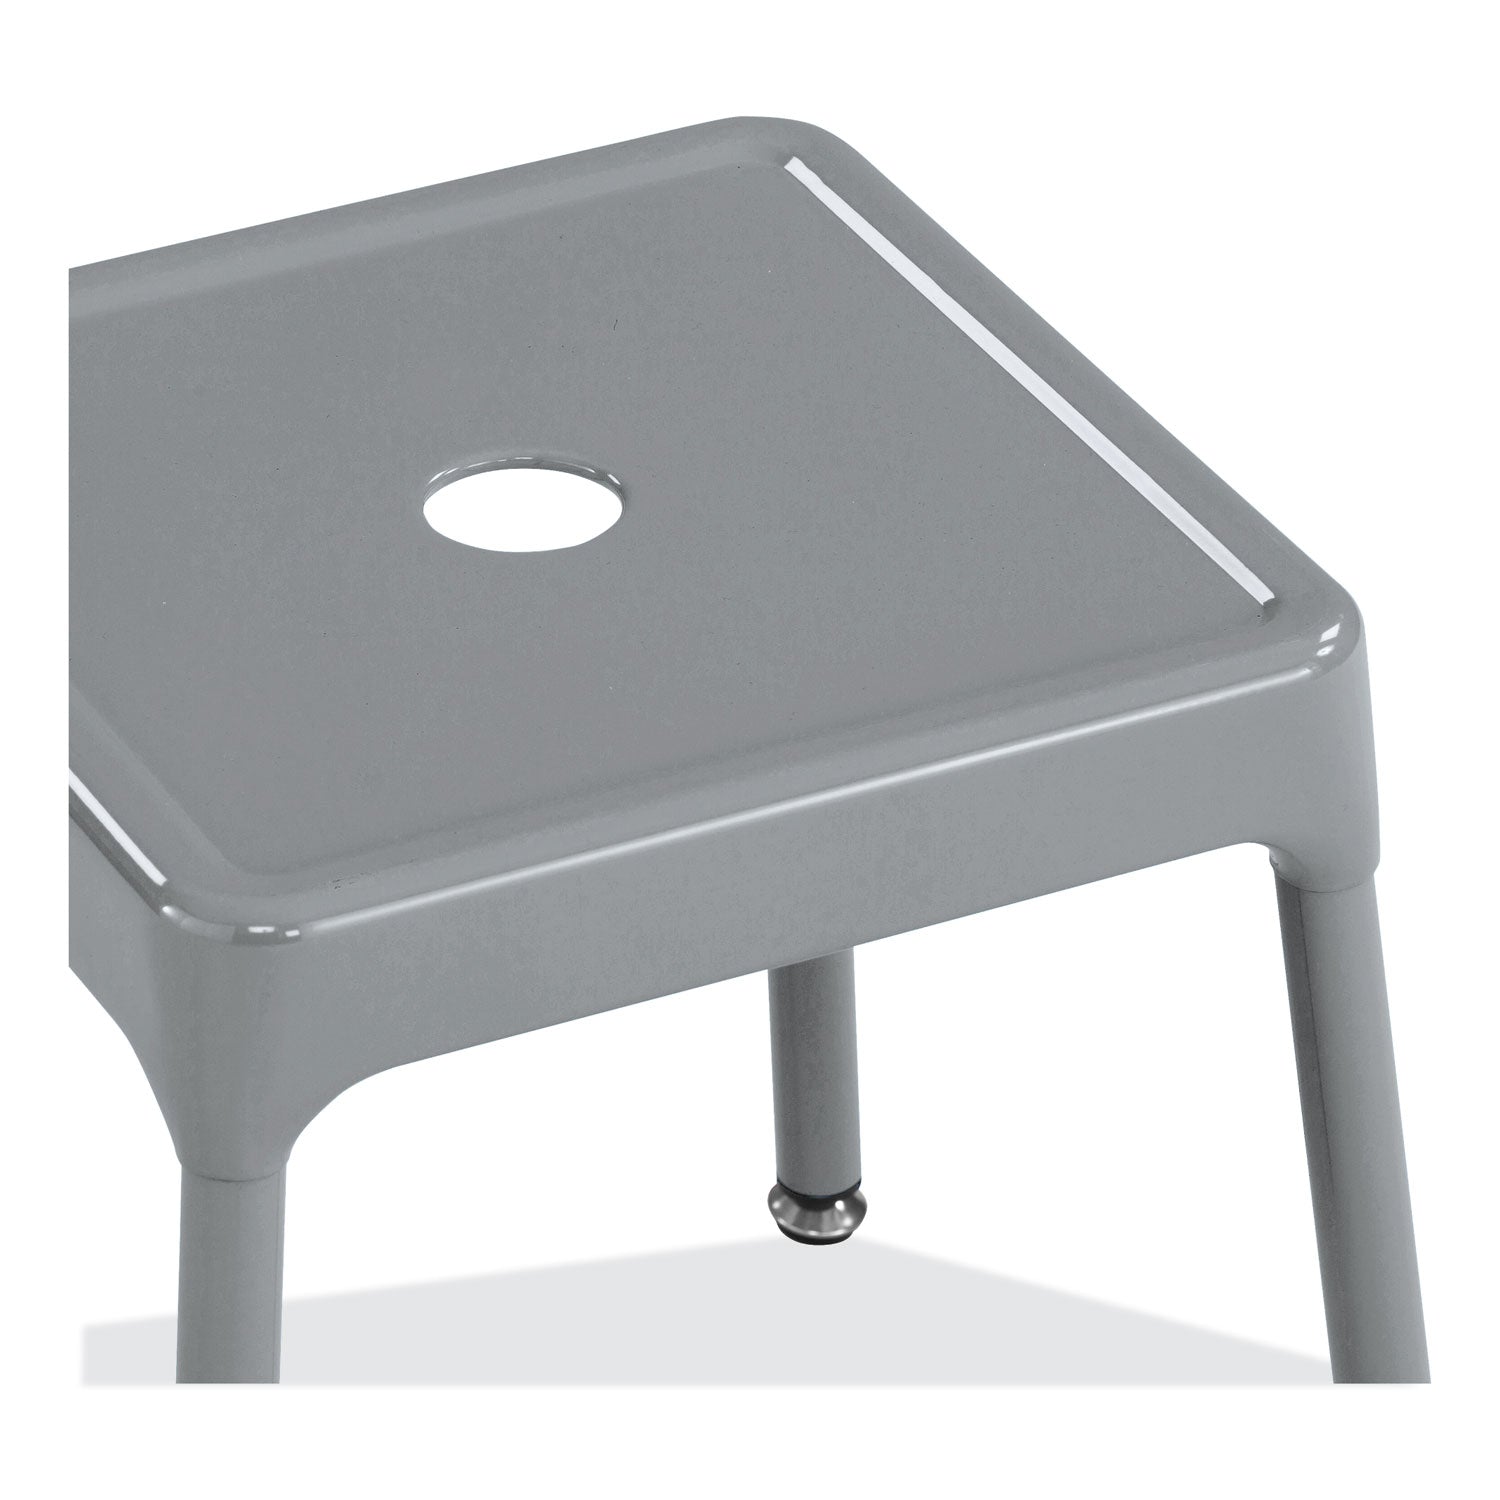 steel-guest-stool-backless-supports-up-to-275-lb-15-to-155-seat-height-silver-seat-base-ships-in-1-3-business-days_saf6603sl - 4